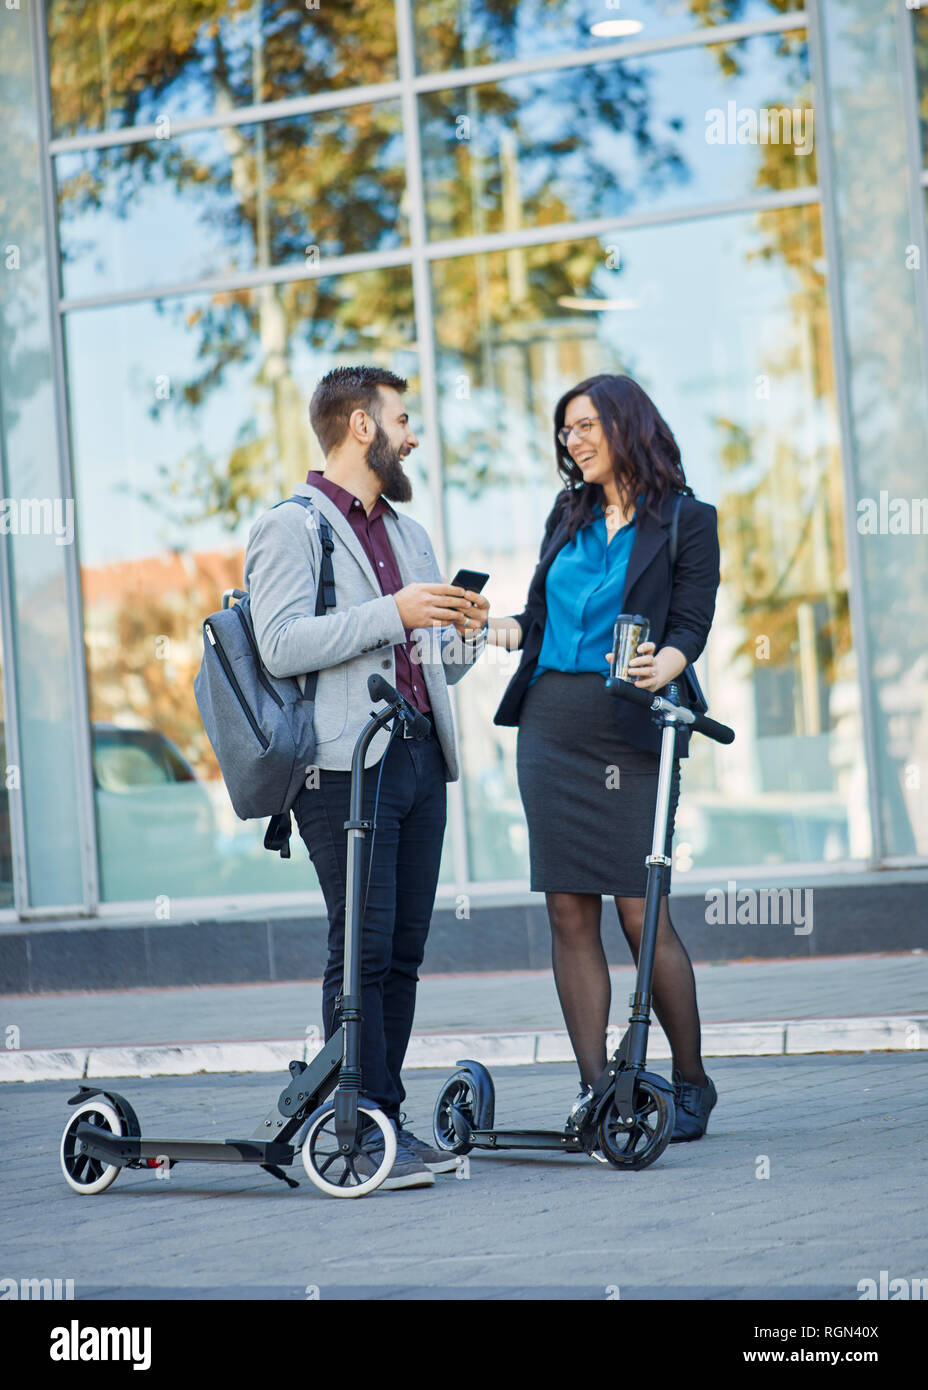 Happy businessman and businesswoman talking on scooters avec pavement Banque D'Images